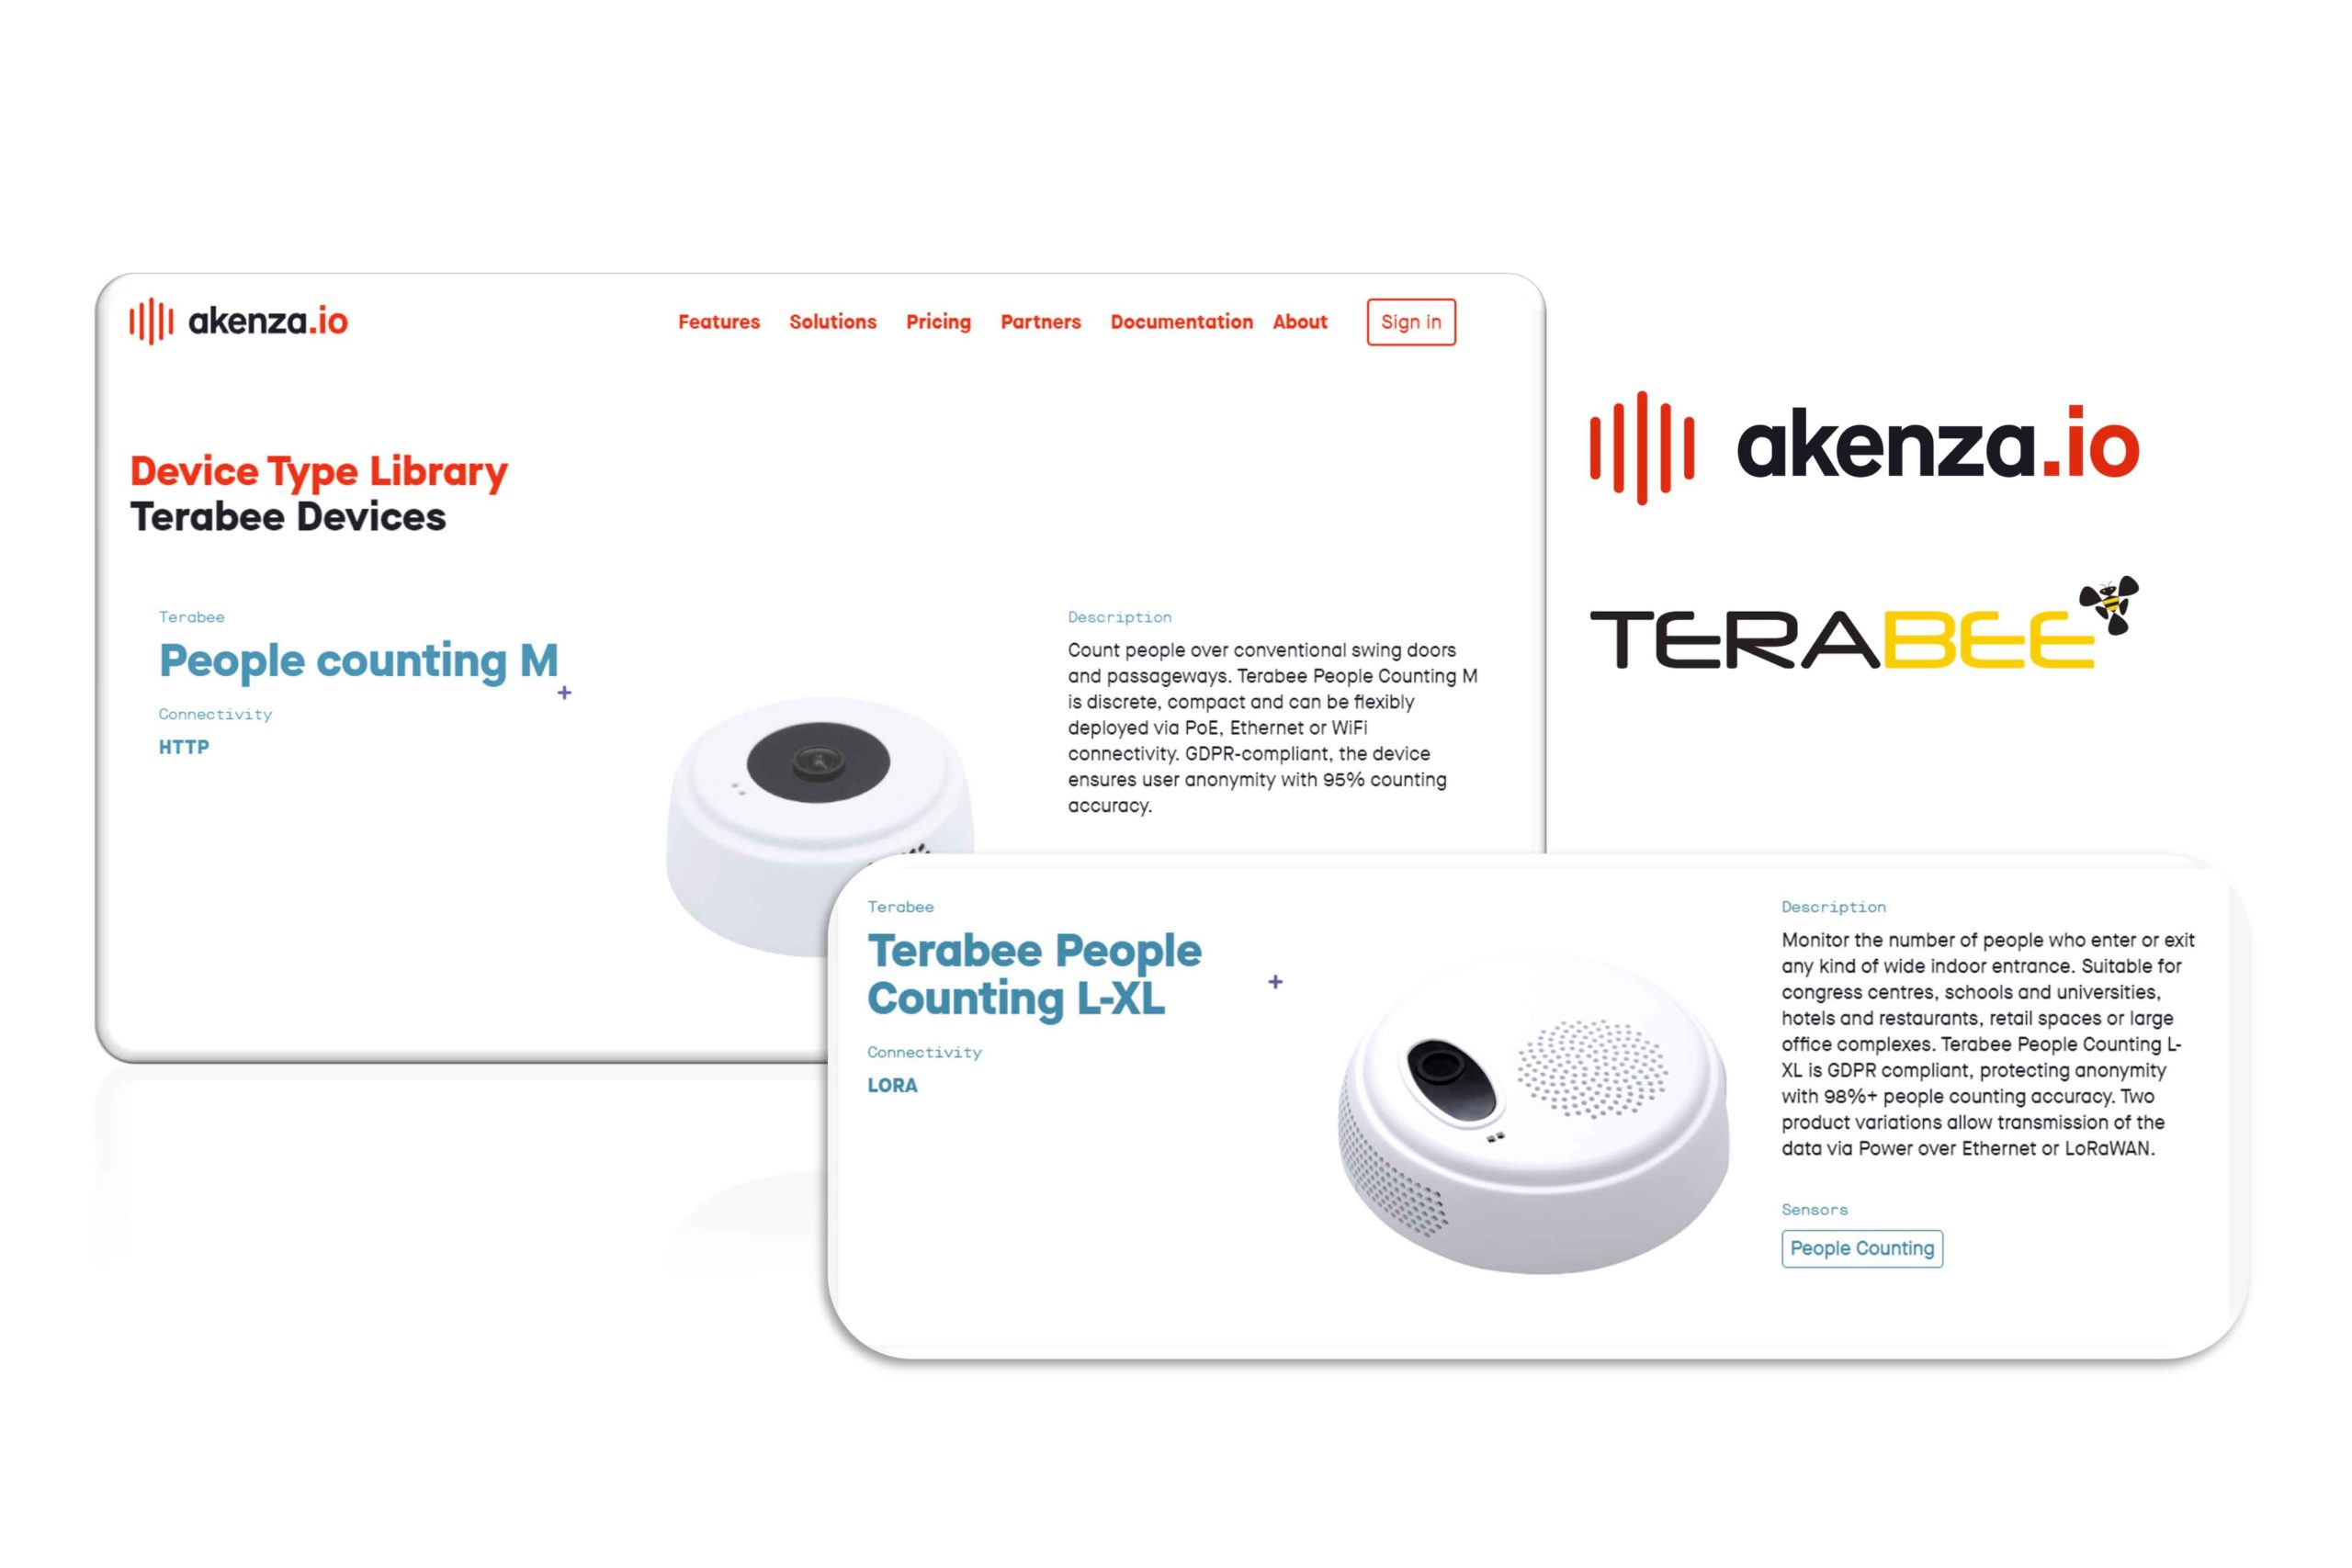 Terabee People Counting Devices Now On Azenza Iot Platform